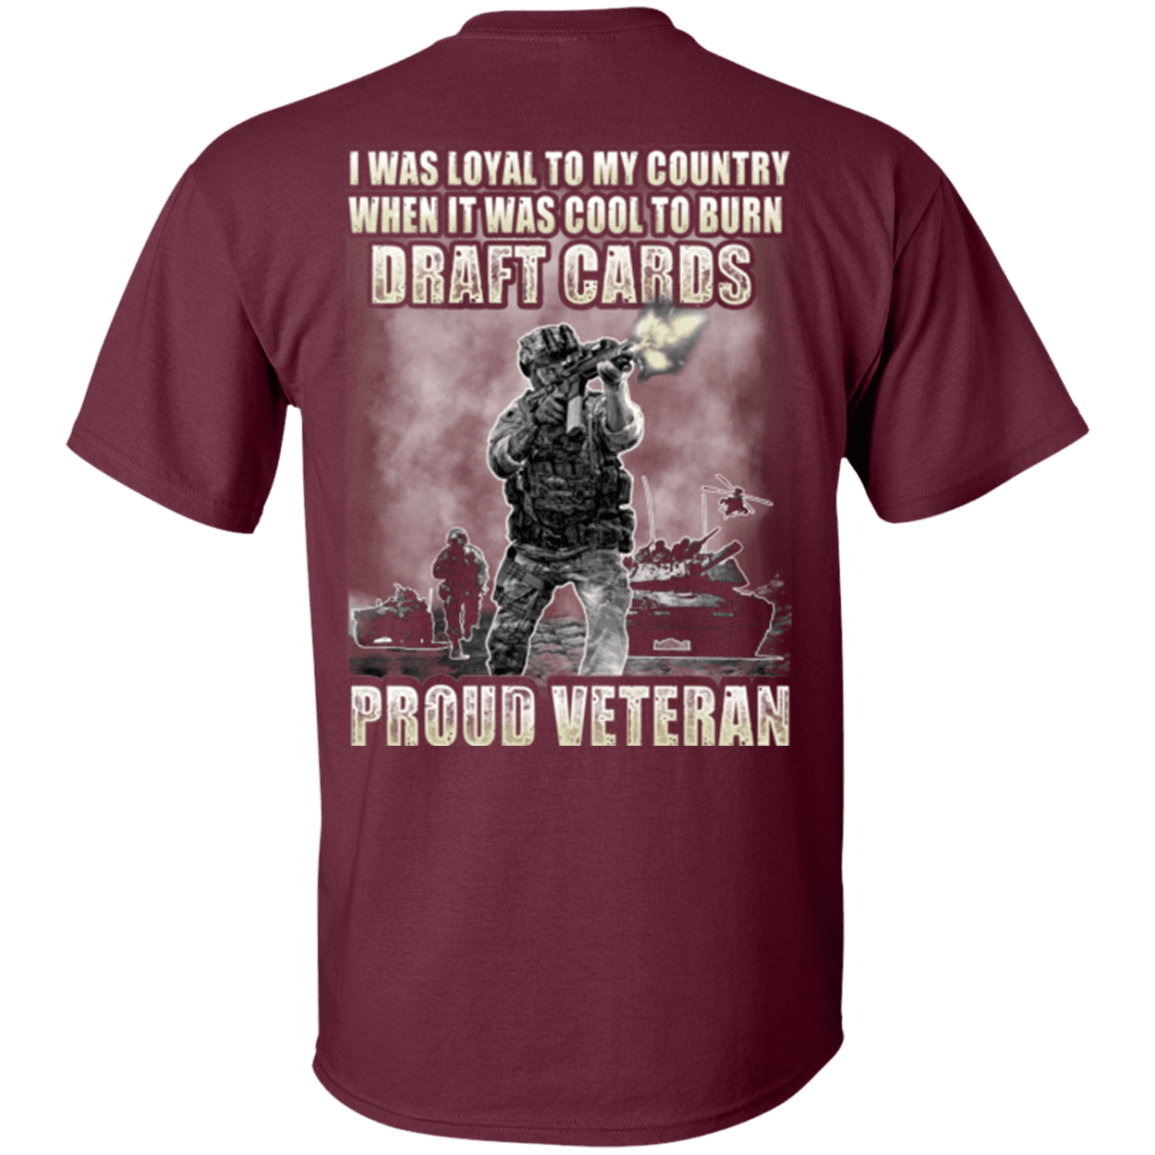 Military T-Shirt "Proud Veteran - I was Loyal To My Country When It Was Cool To Burn Draft Cards"-TShirt-General-Veterans Nation